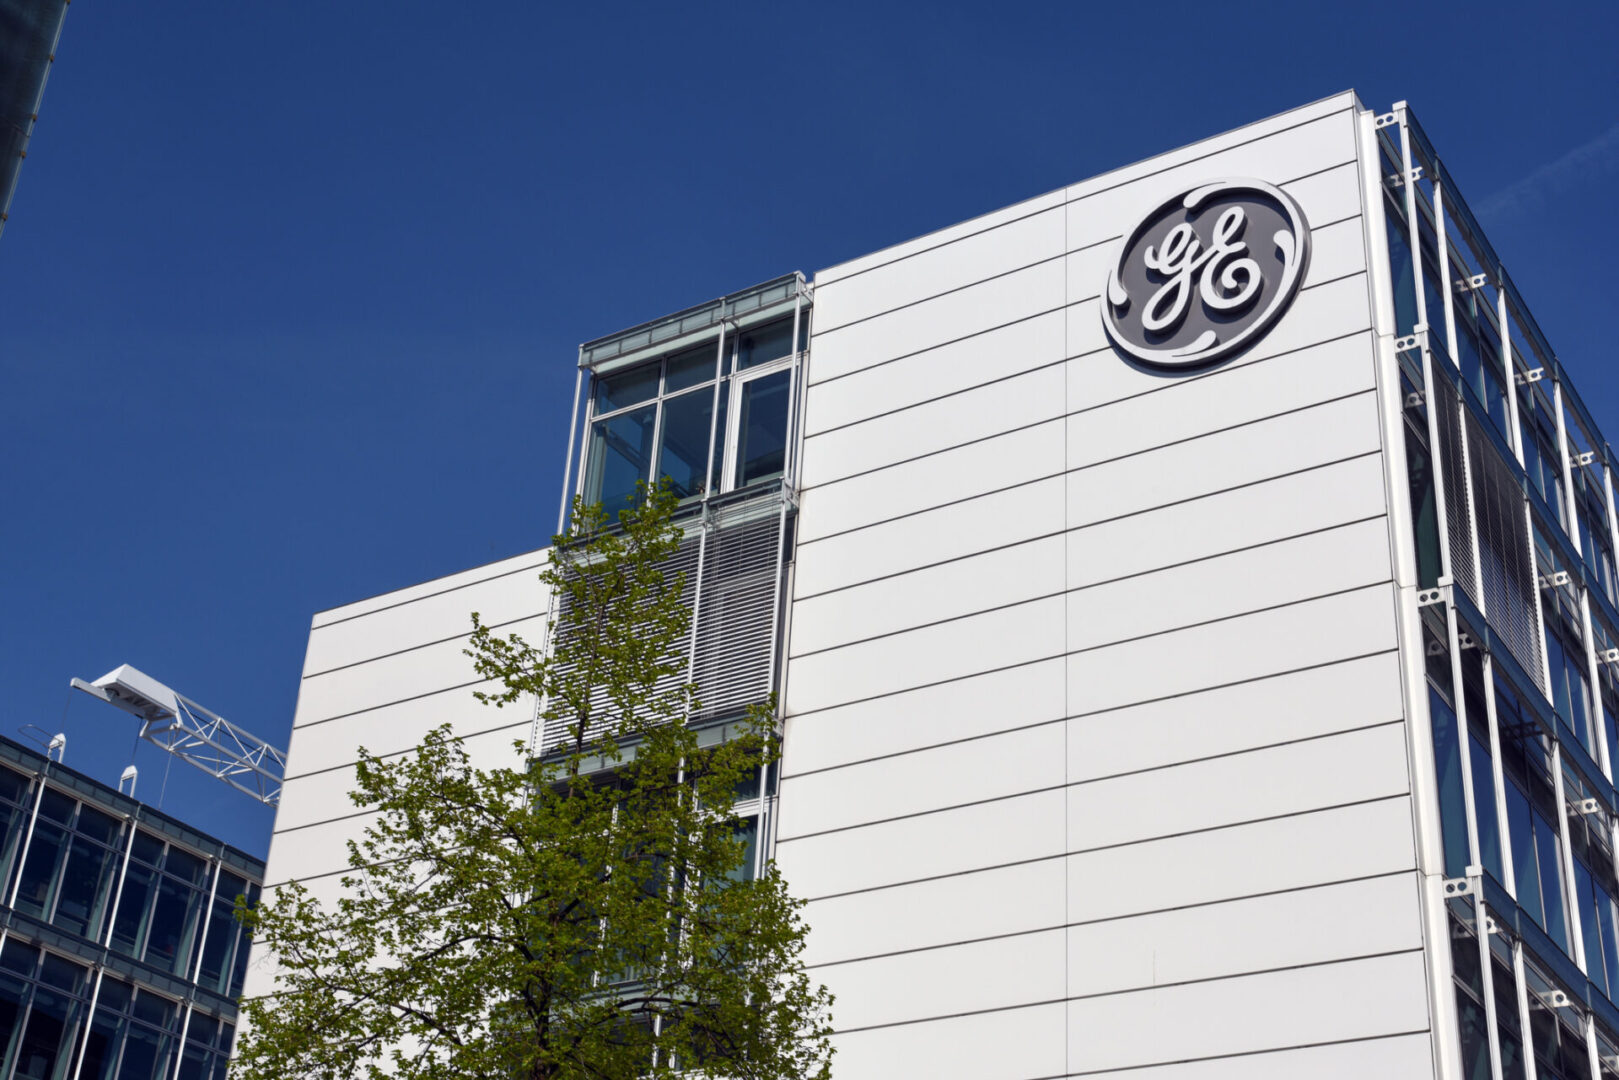 General Electric was founded on April 15, 1892 in Schenectady, New York. GE is active in Switzerland since more than 125 years. The image shows The GE building in Baden (Canton Aargau).